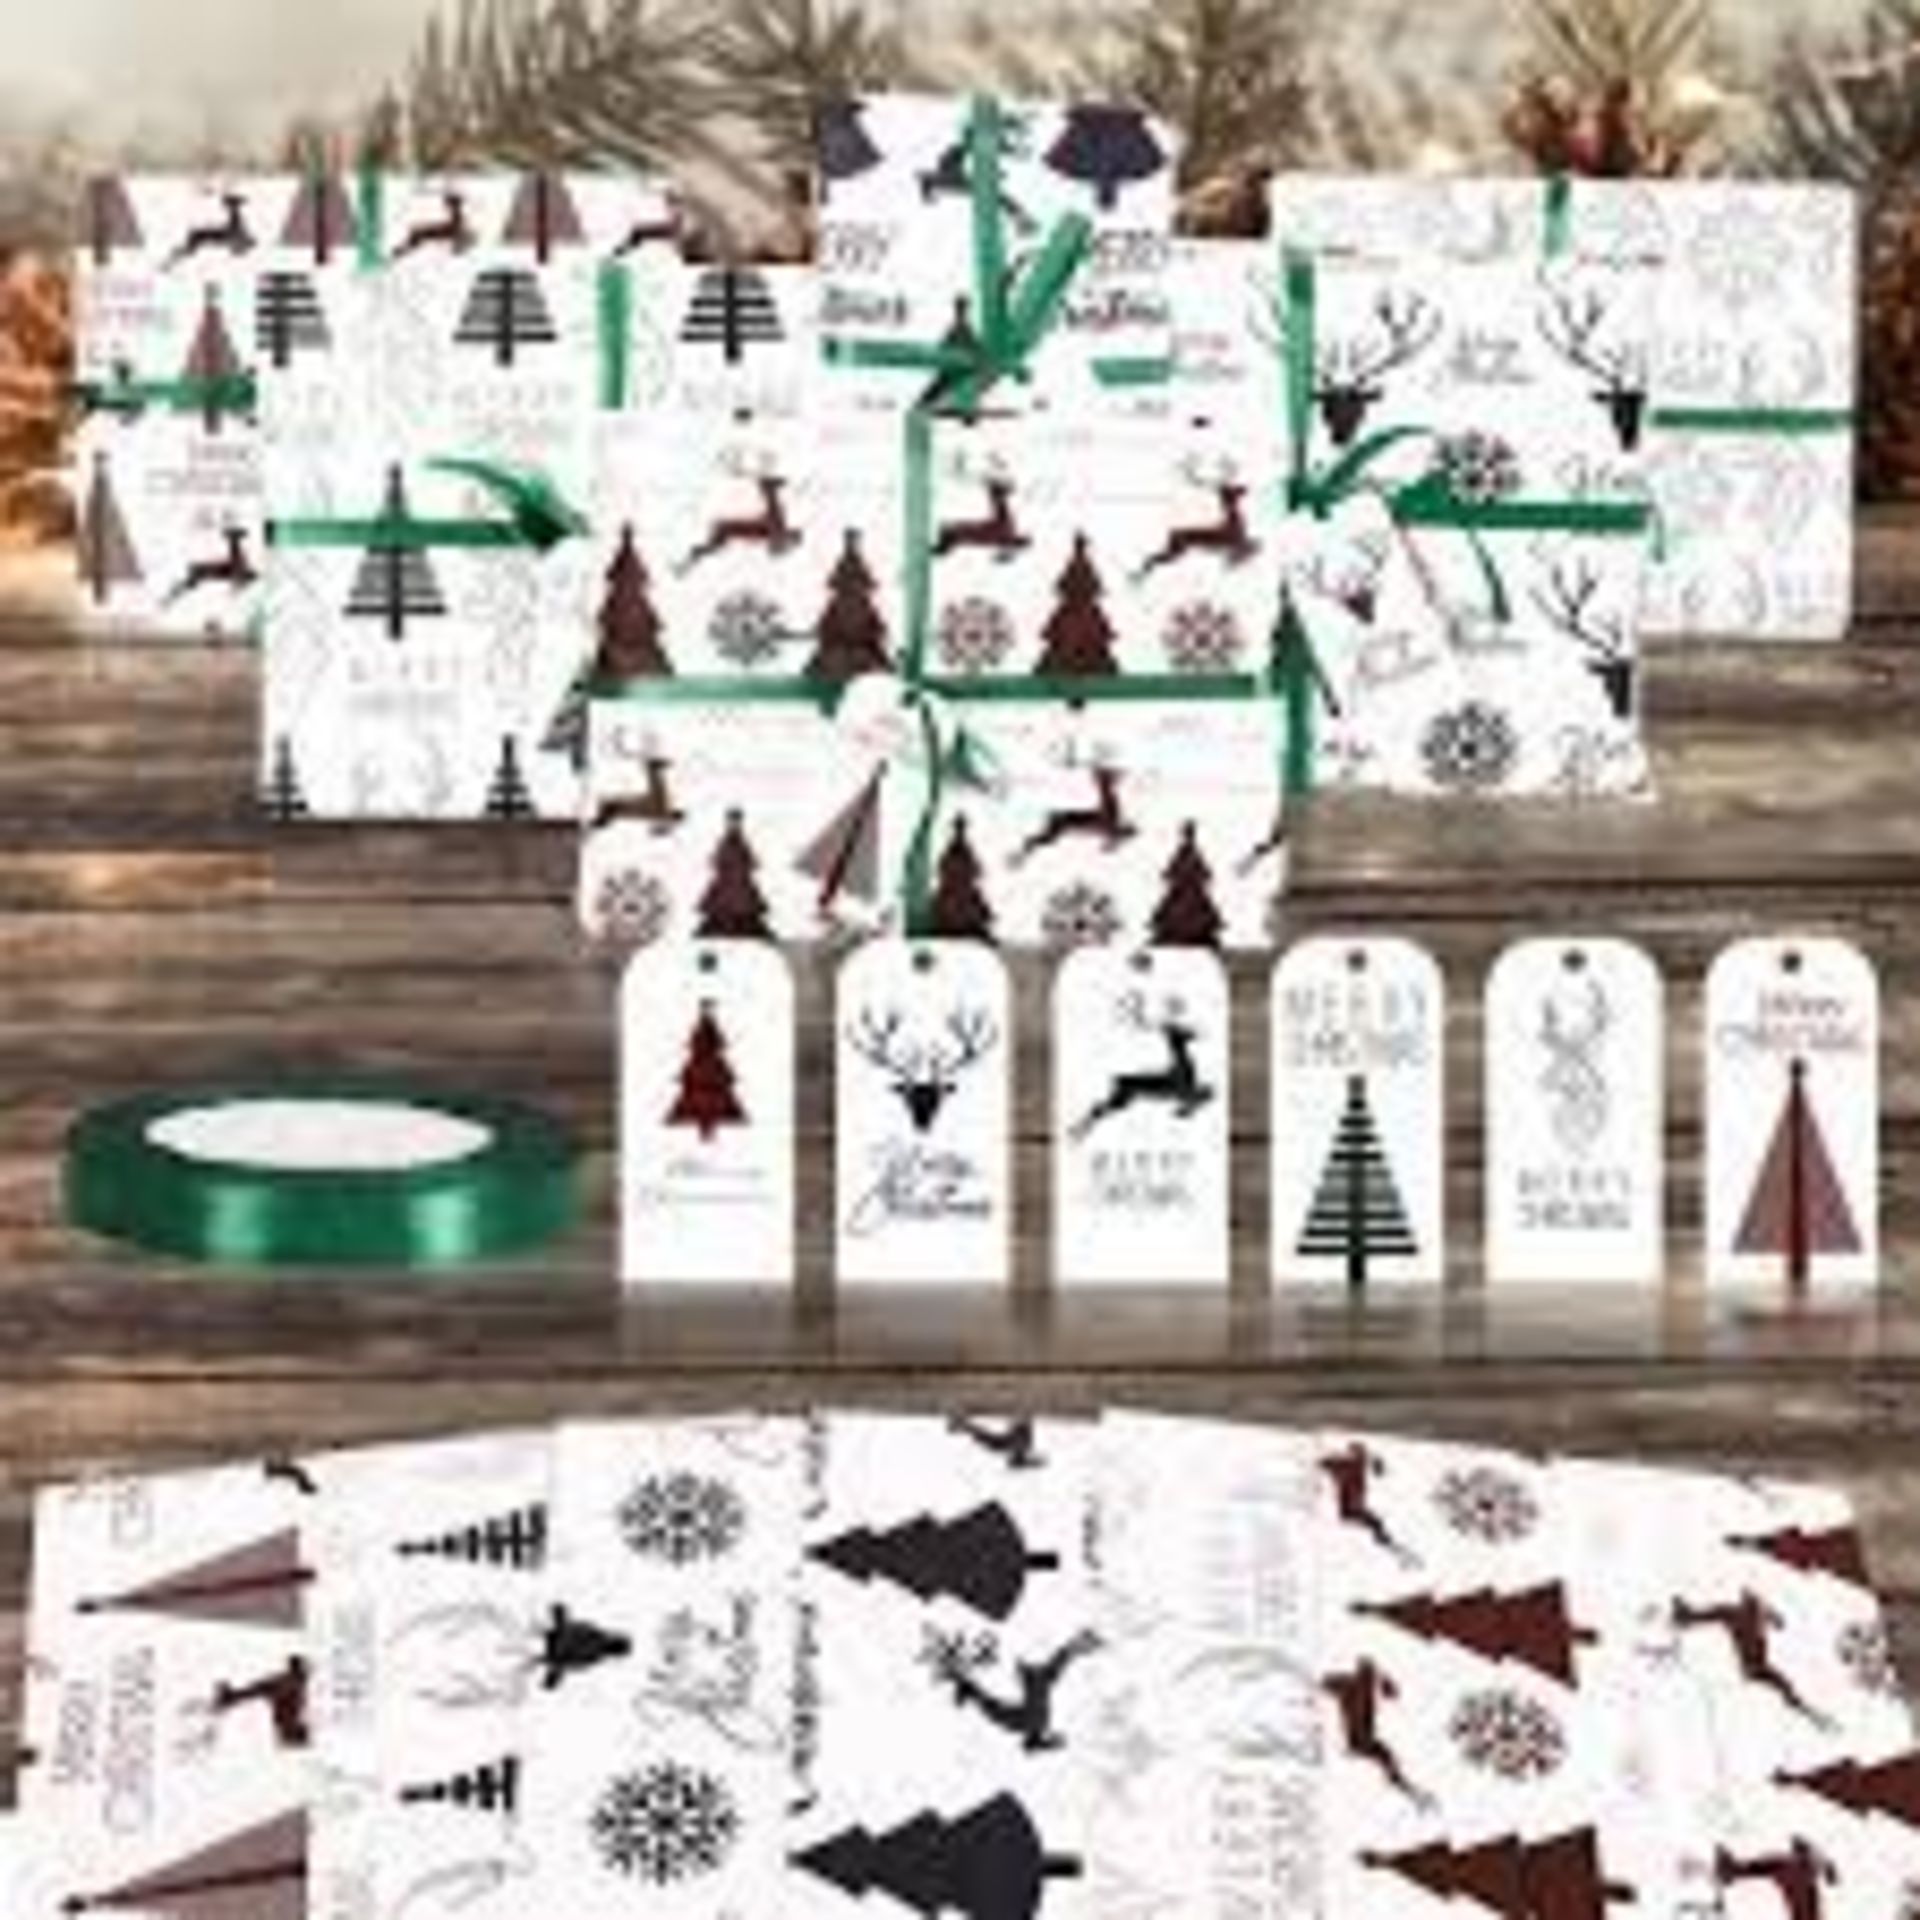 TRADE LOT 600 X BRAND NEW ASSORTED SETS OF 6 FOLDED SHEETS CHRISTMAS WRAPPING PAPER SET IN VARIOUS - Image 2 of 4